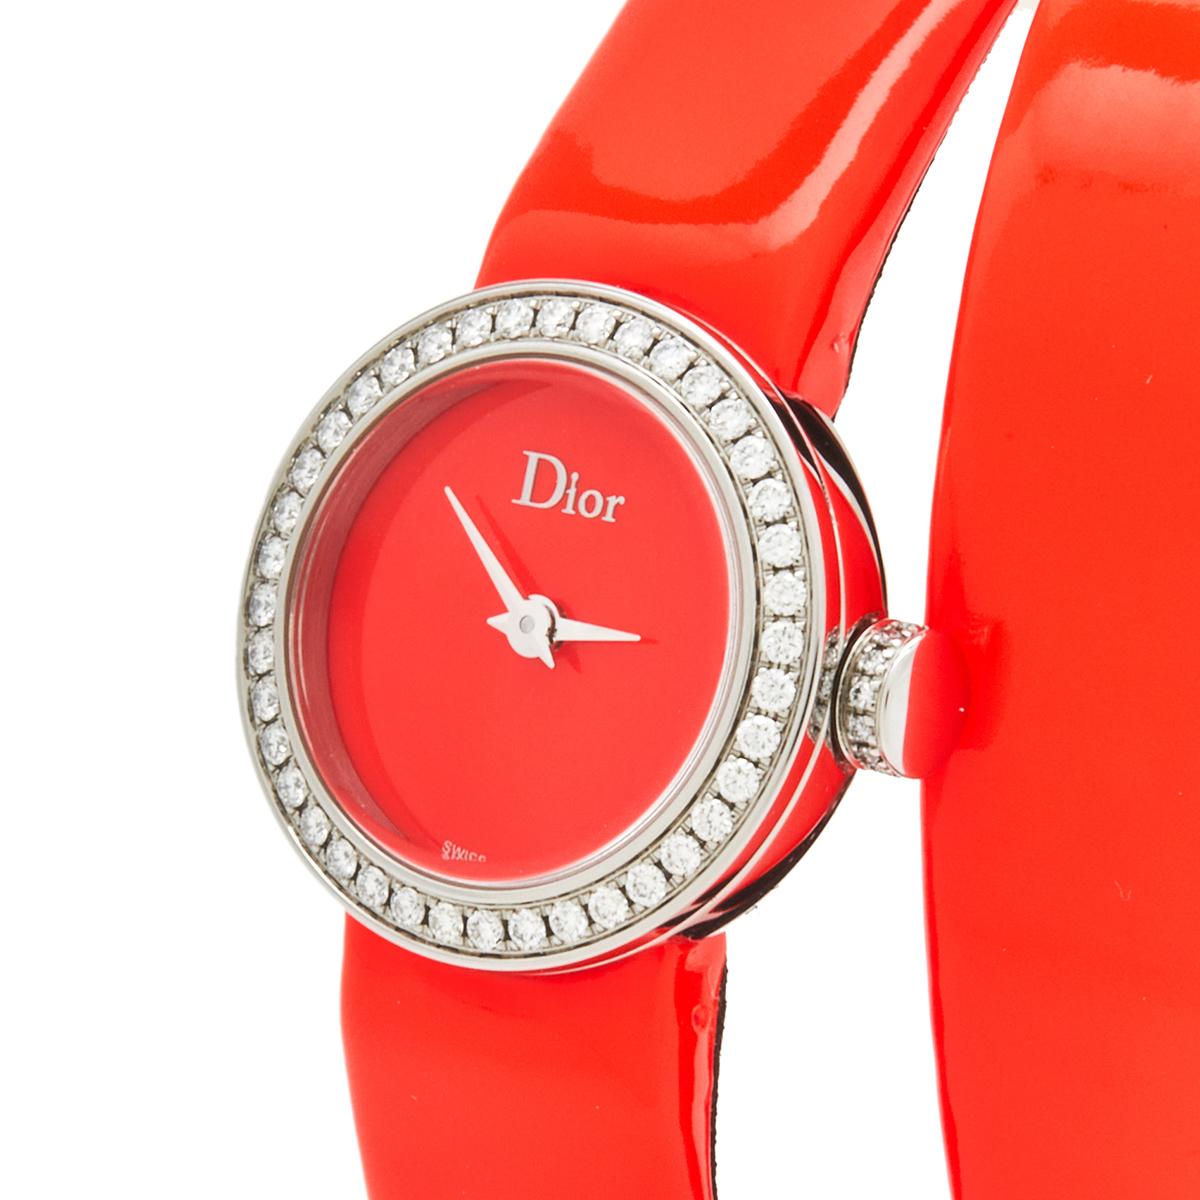 This exquisite wristwatch from the La D de Dior collection is the perfect blend of expert Swiss watch-making and well-crafted jewelry. Created in 2003, this collection was inspired by the 70s and is known for its use of jeweler’s materials including